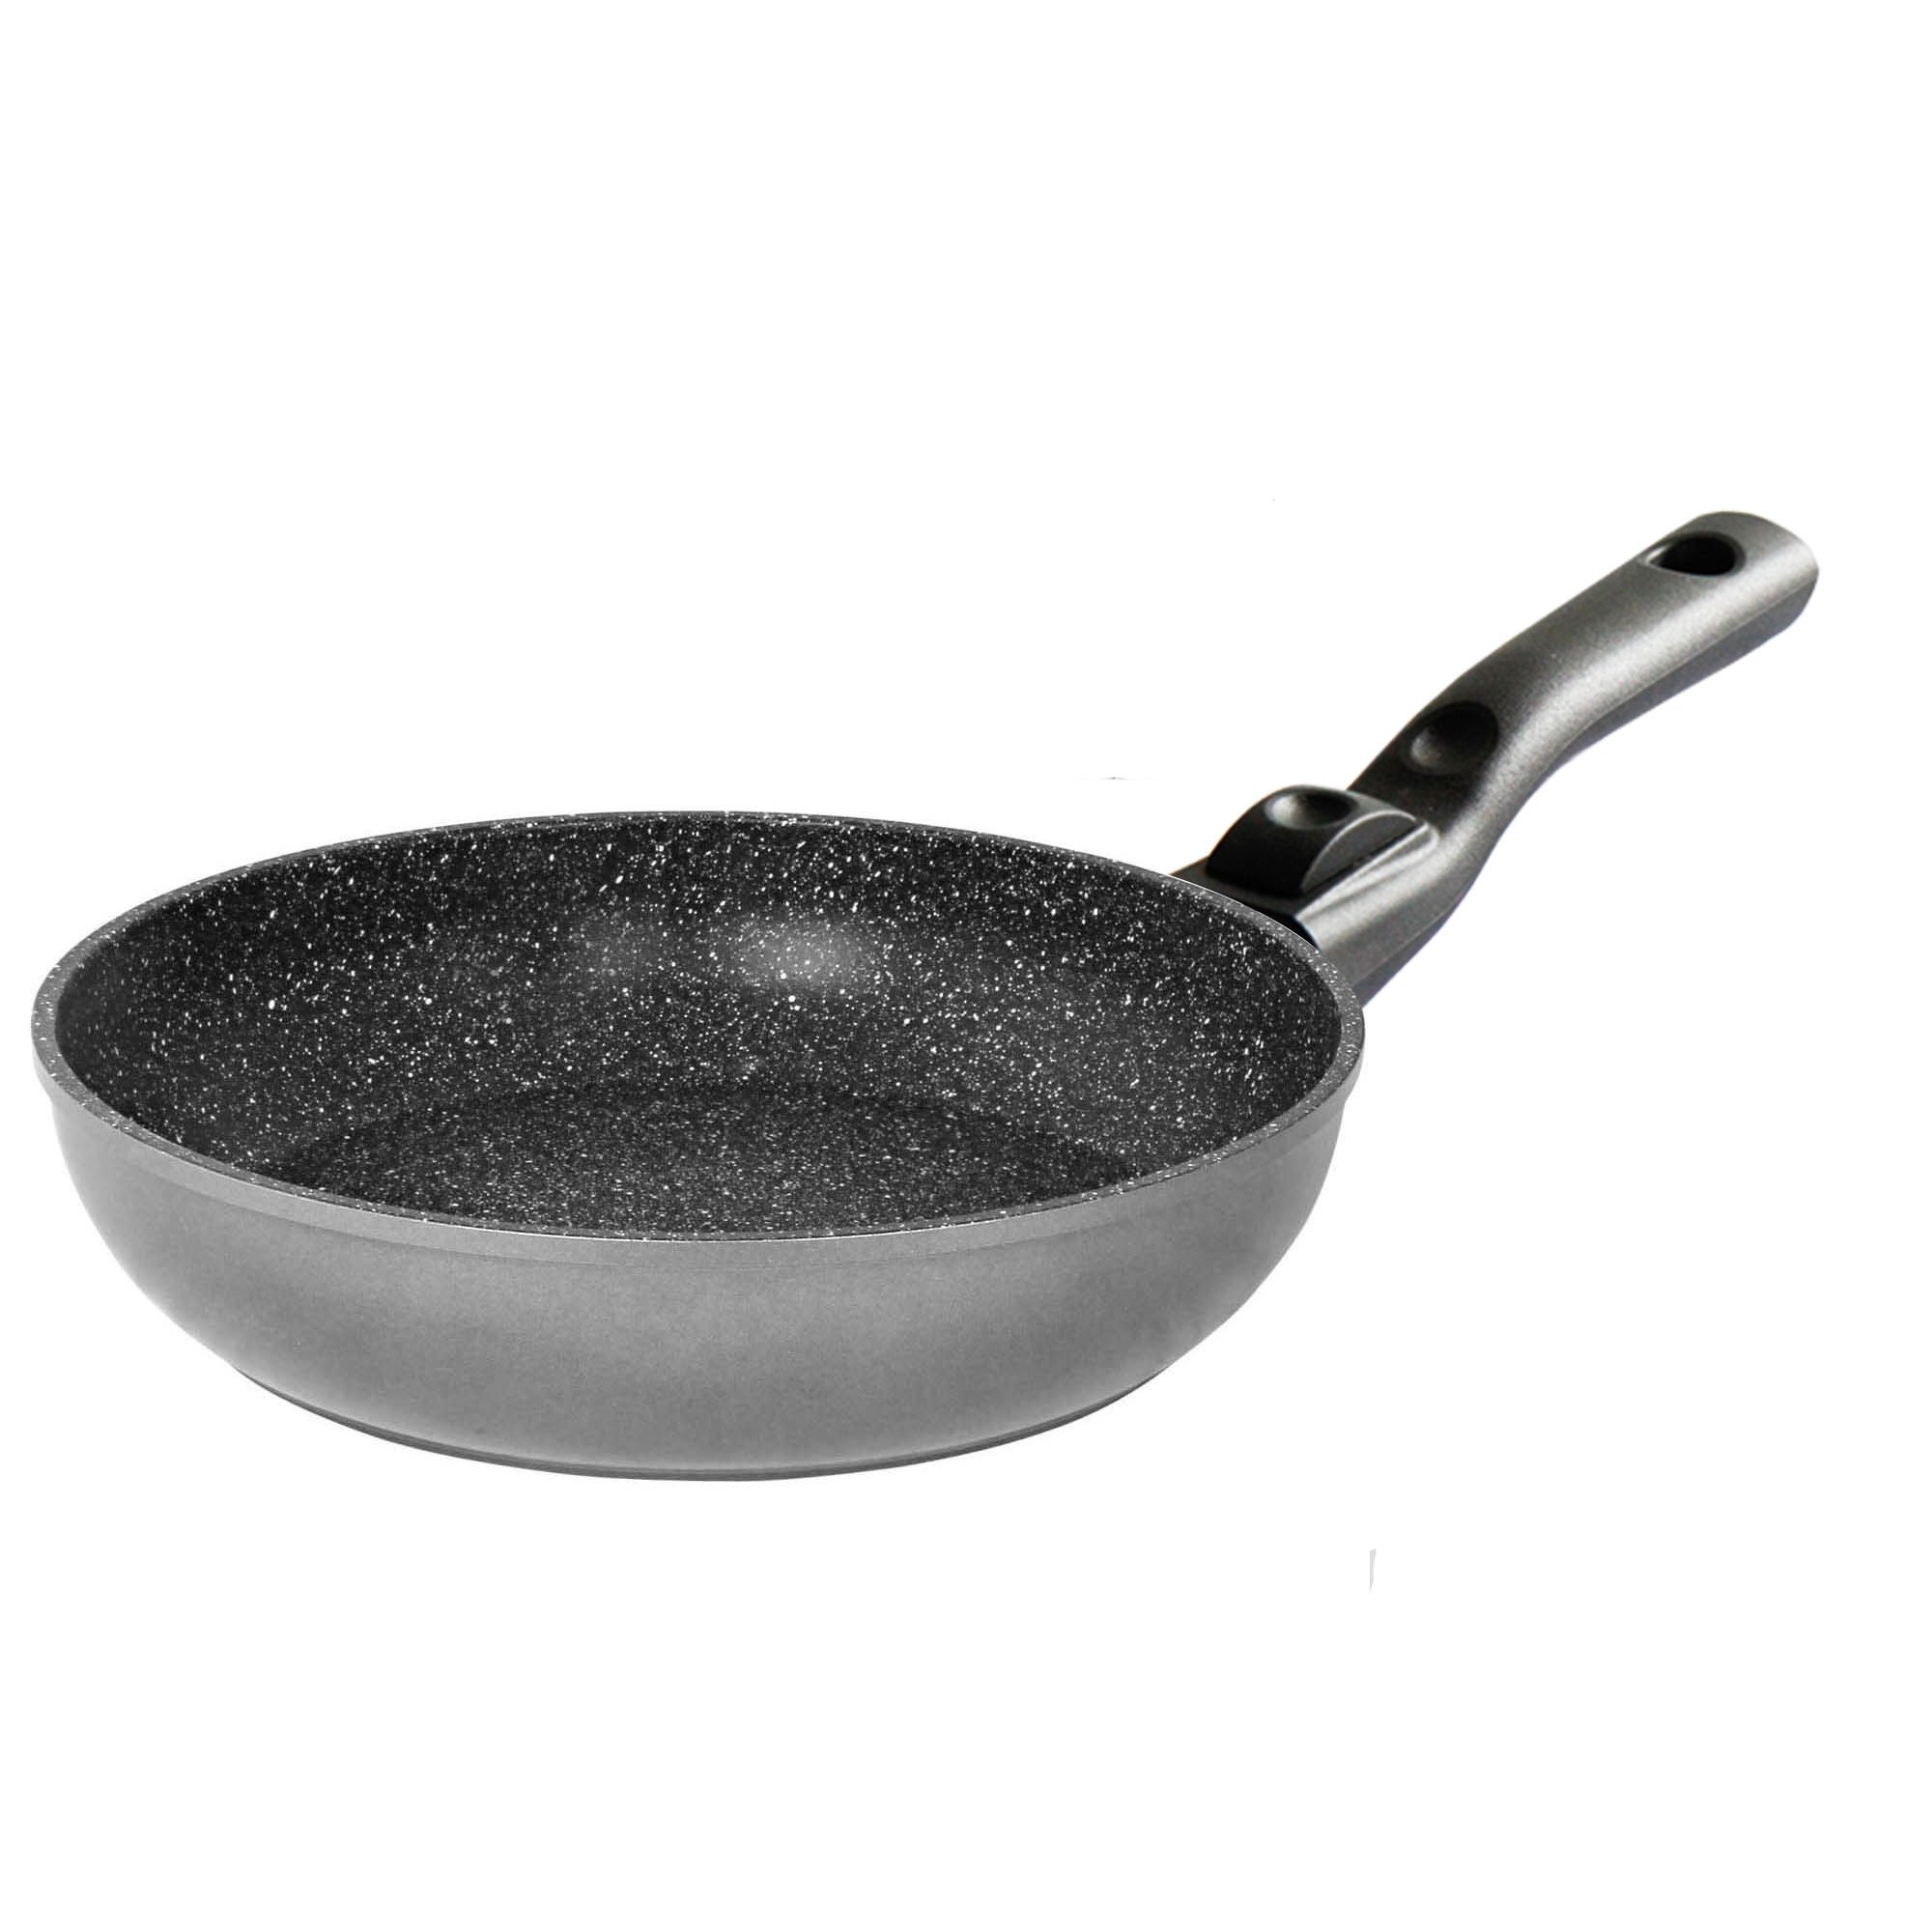 STONELINE® Deep Frying Pan 28 cm, Removable Handle, Non-Stick | Made in Germany | FLEX